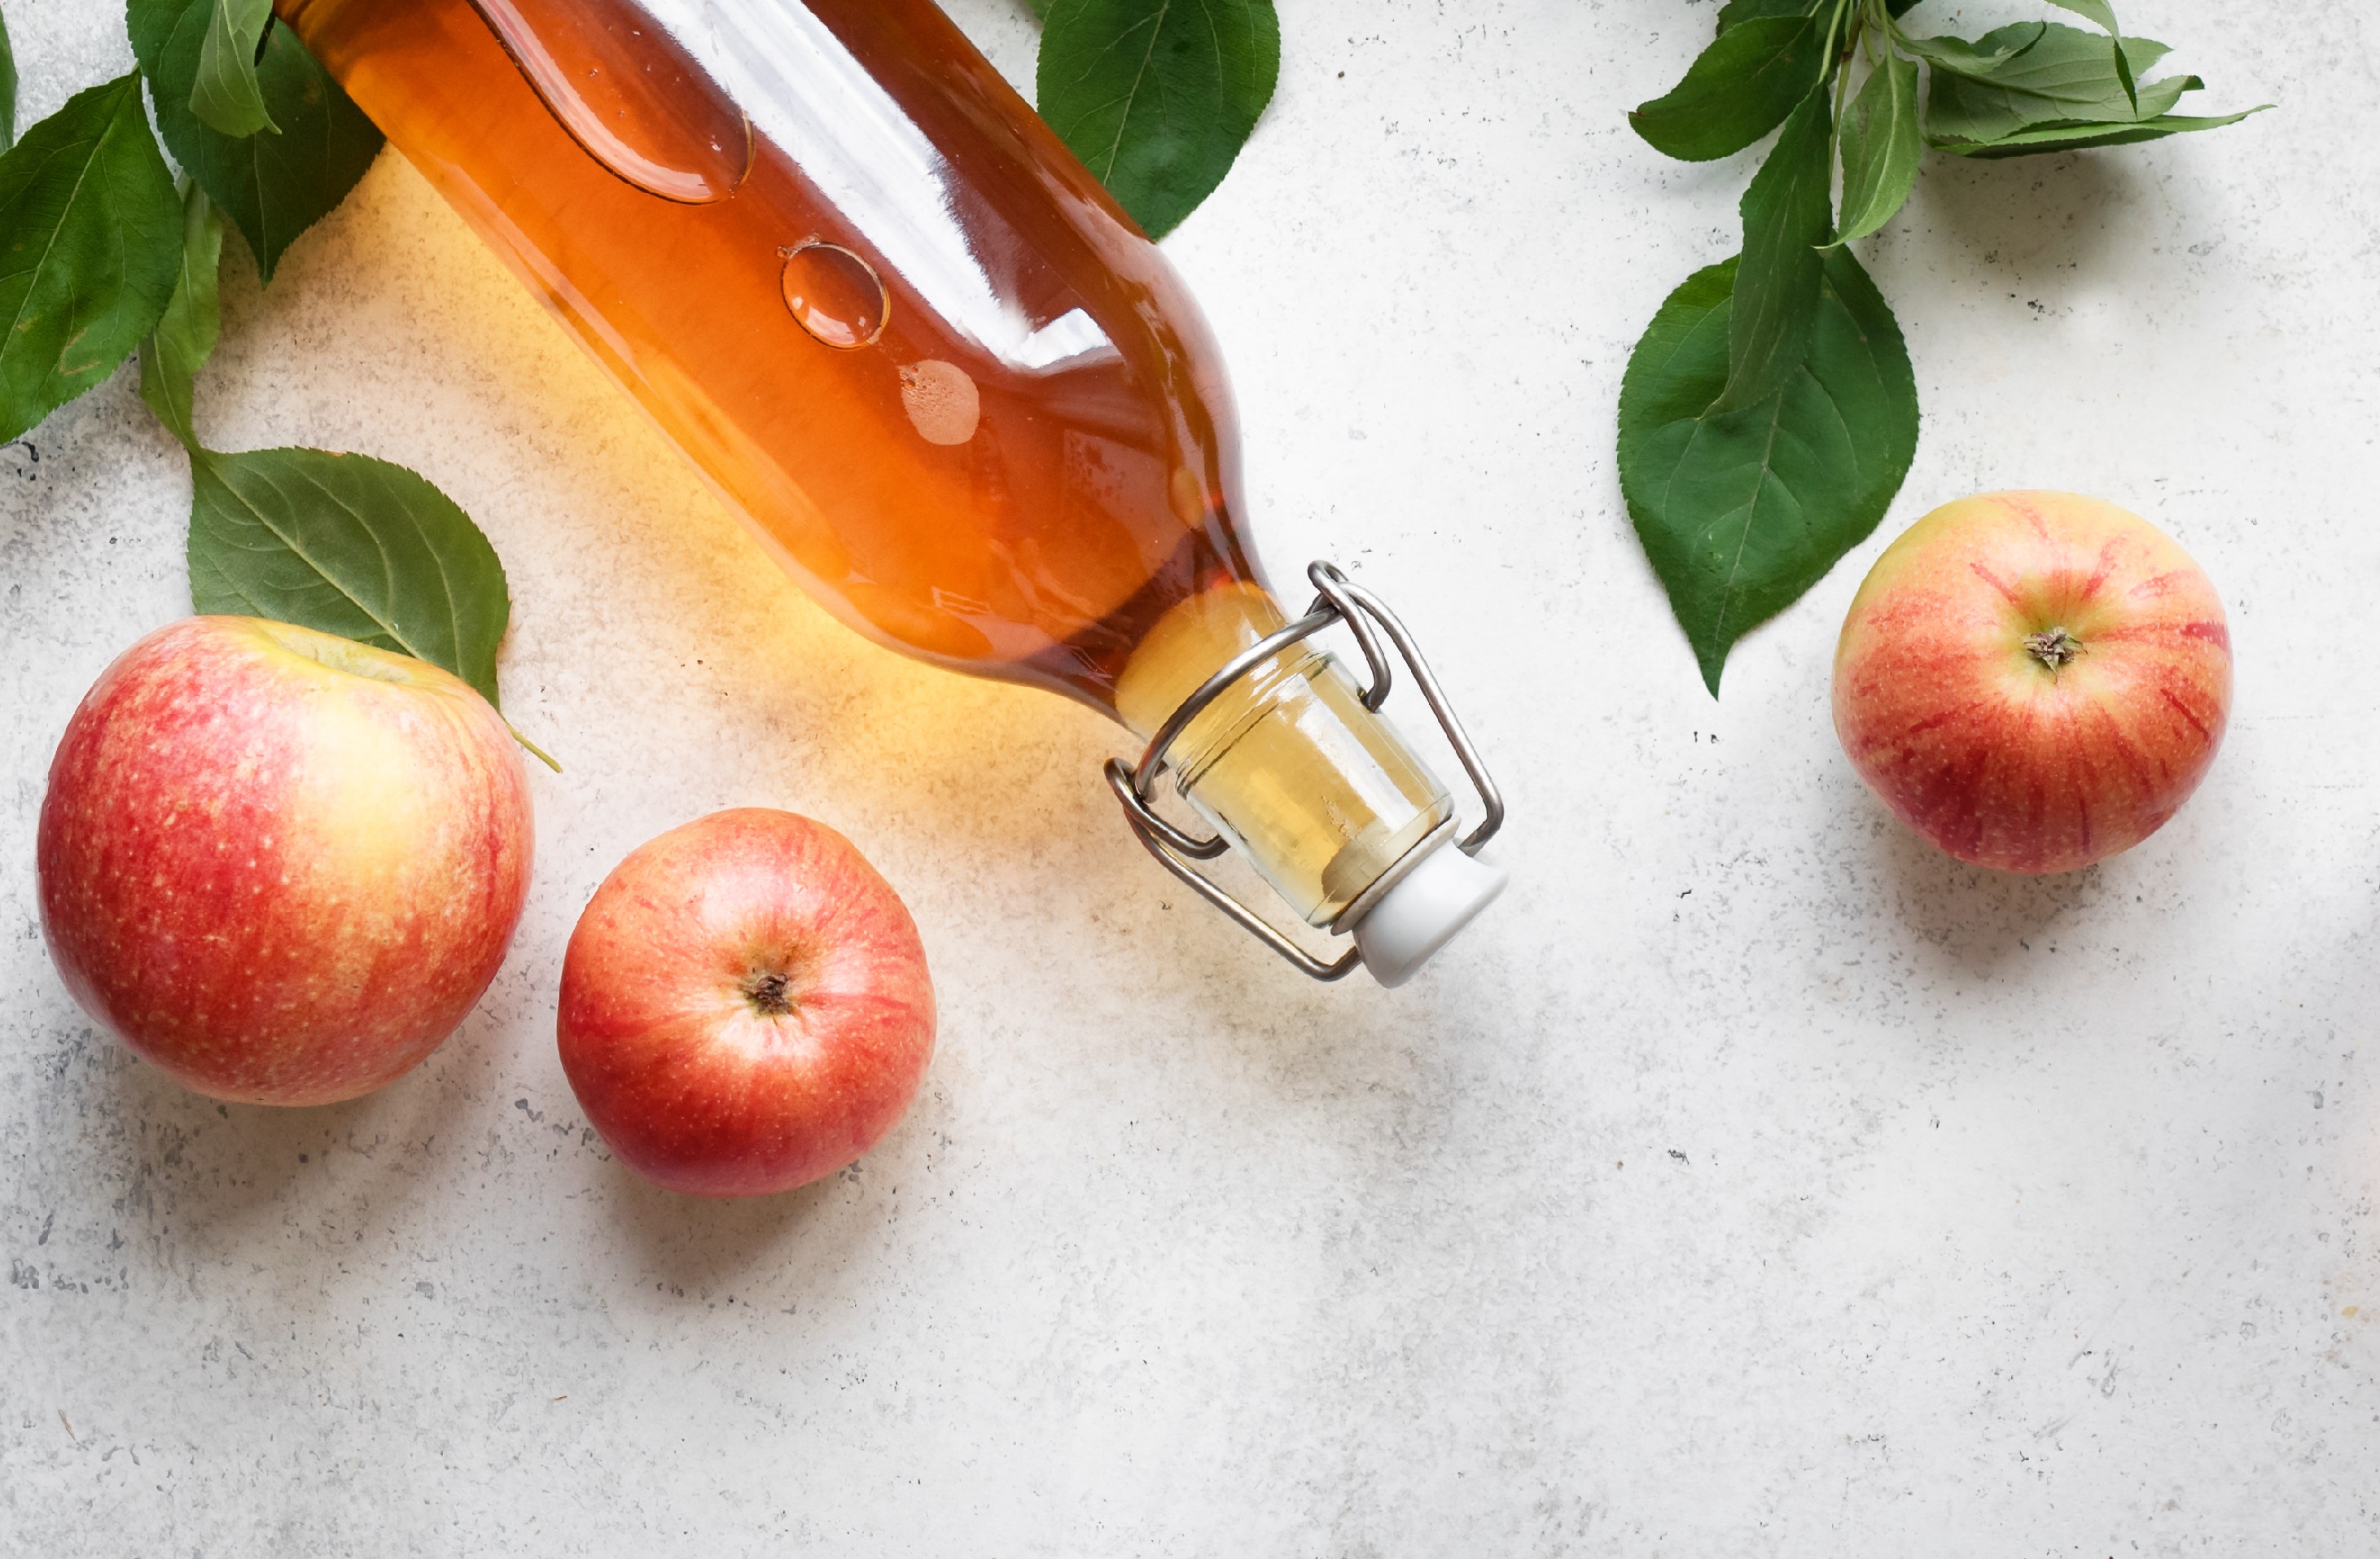 Here's what the fuss is all about over Apple Cider Vinegar